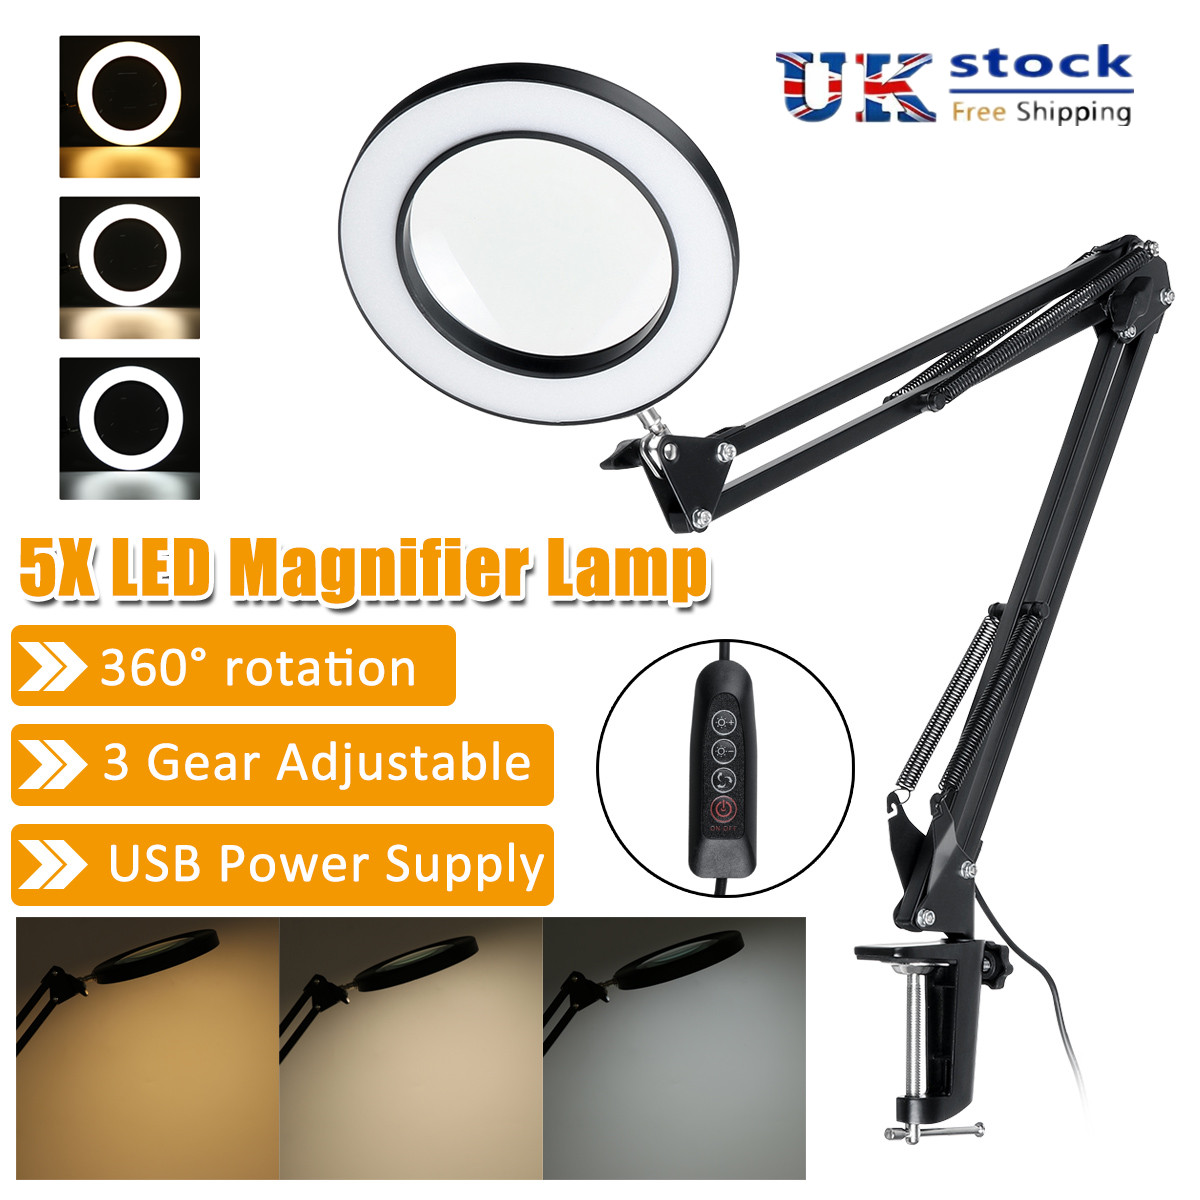 5X-Magnifying-Lamp-Clamp-Mount-LED-Magnifier-Lamp-Manicure-Tattoo-Beauty-Light-1801341-1